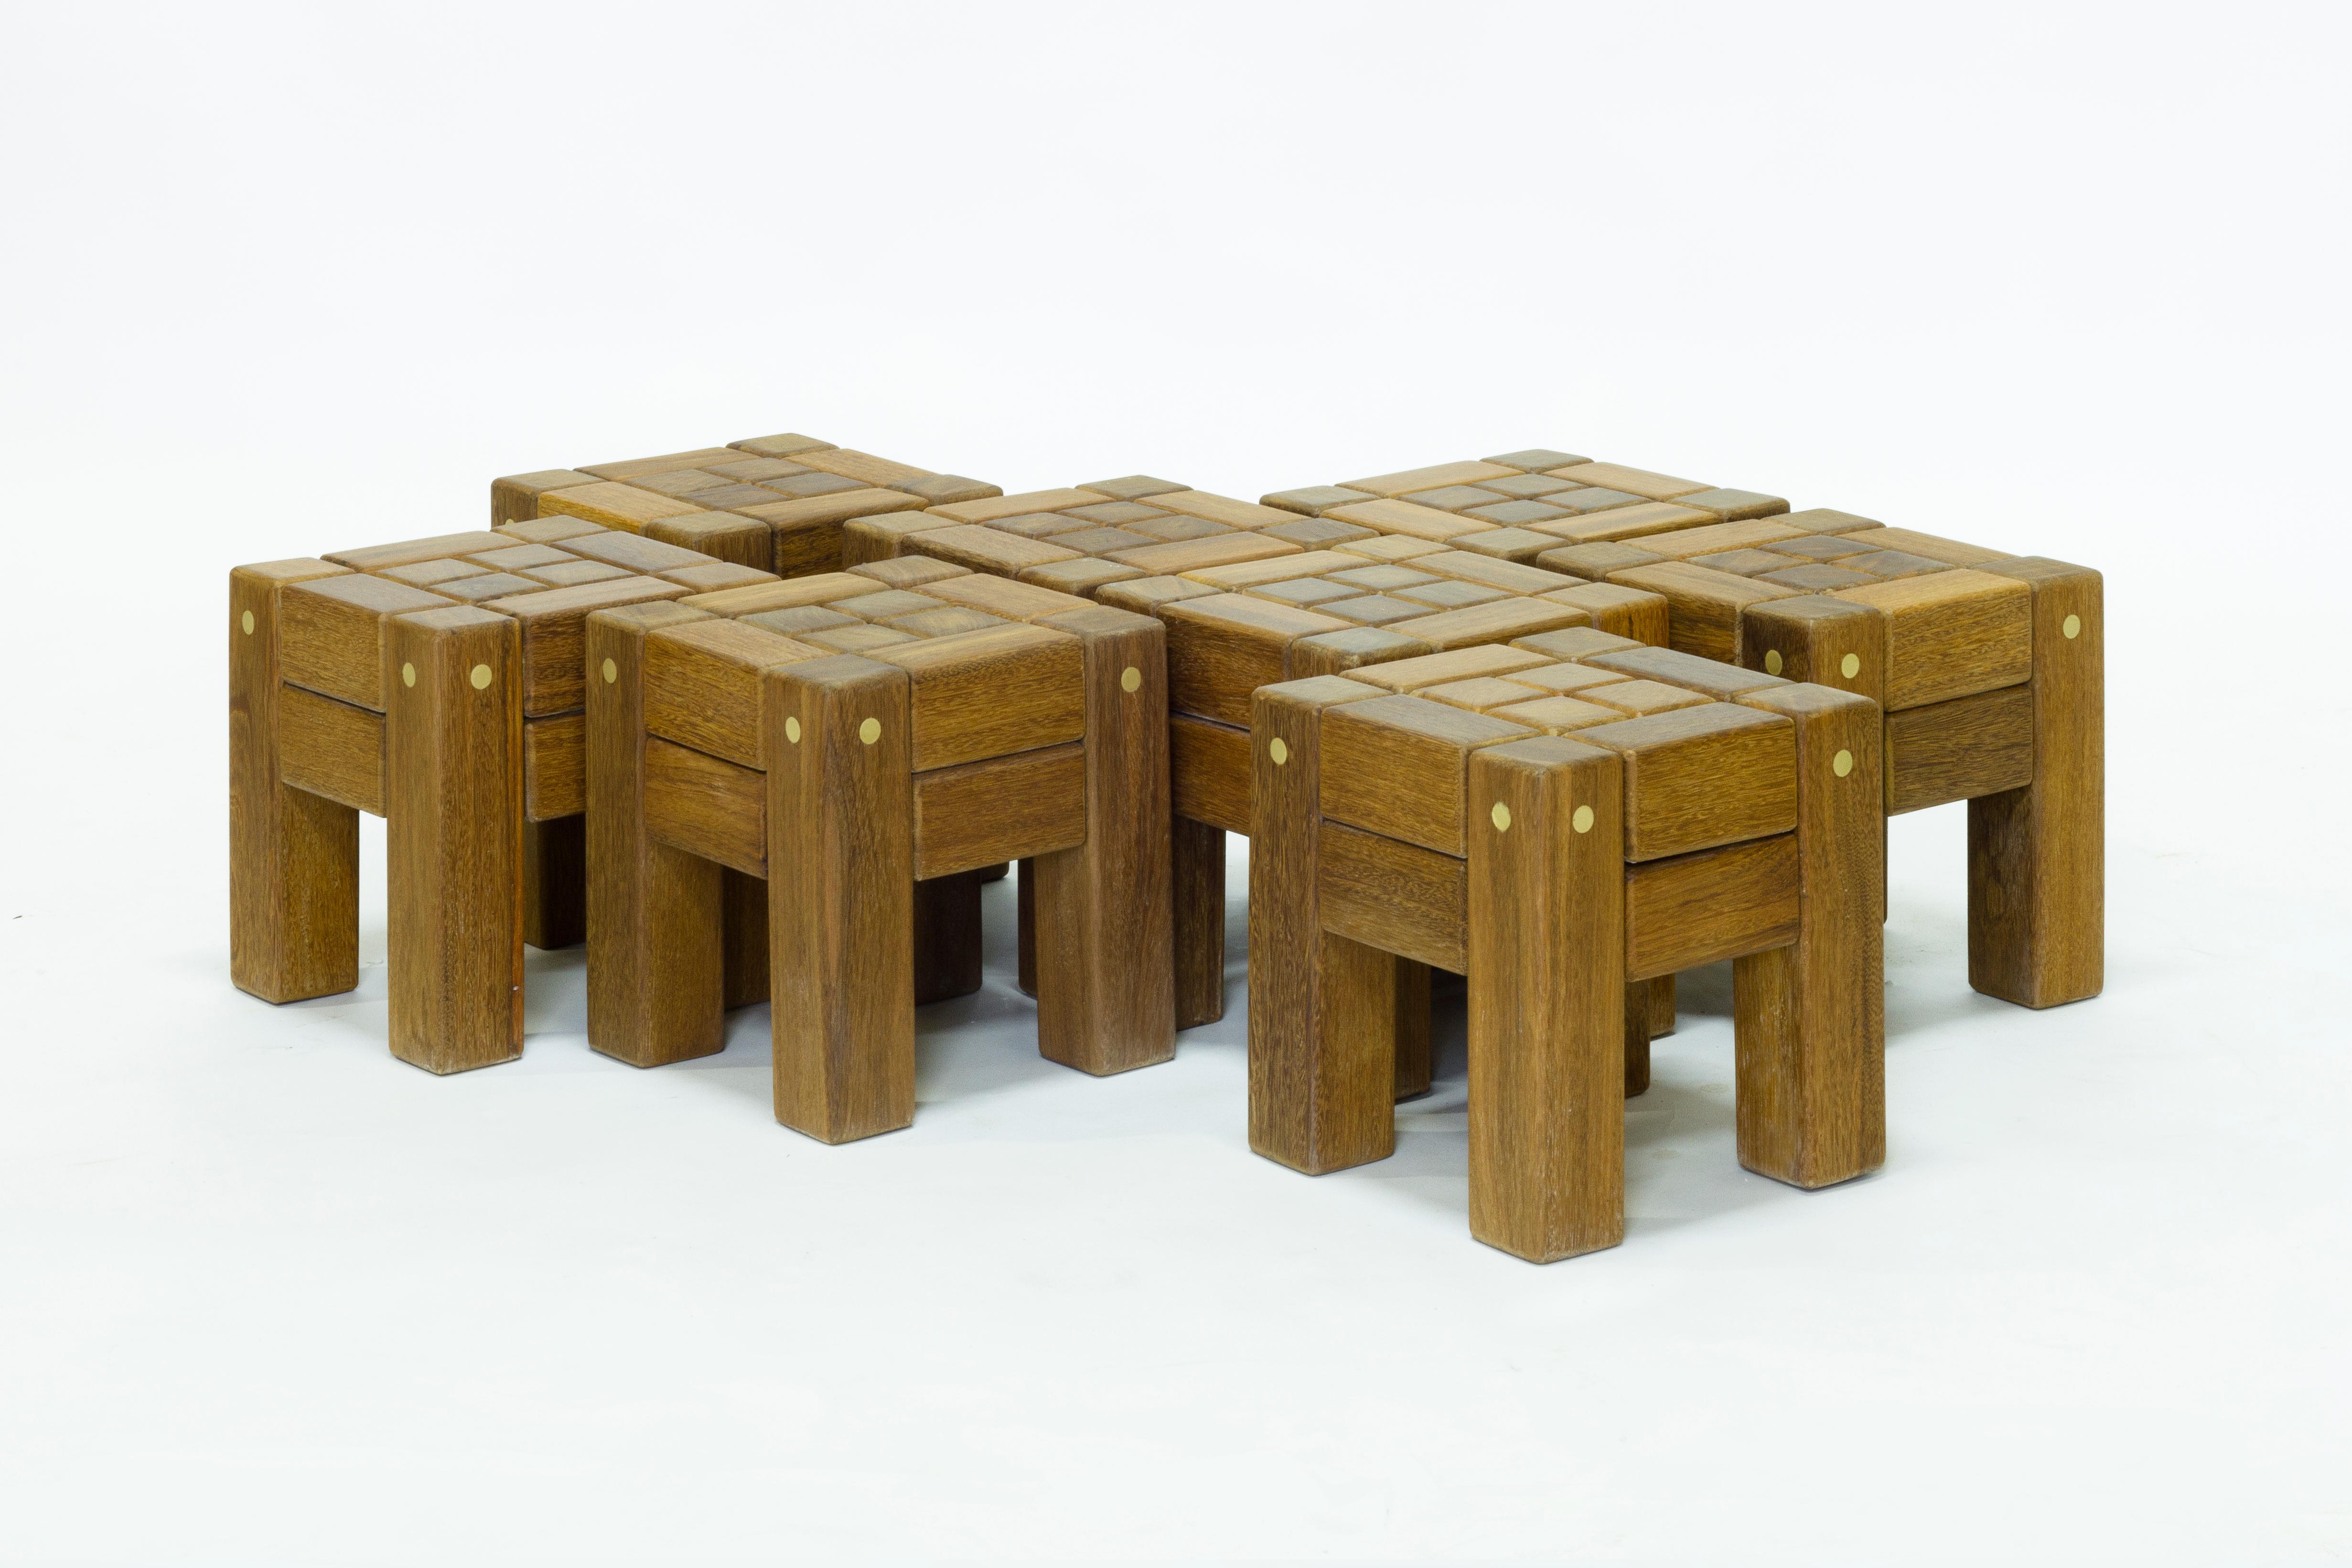 Stool in Hardwood and Brass. Brazilian Contemporary Design by O Formigueiro. im Angebot 1